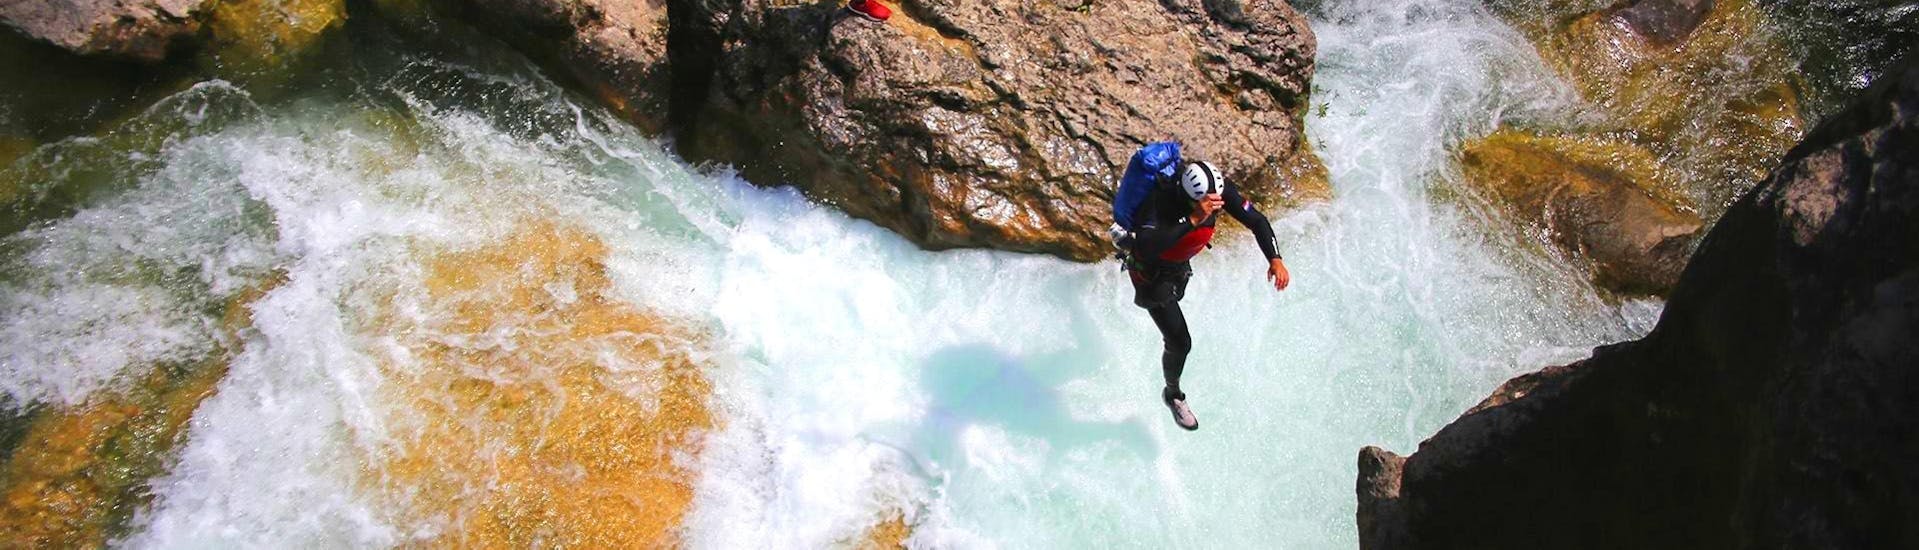 A guide from Adventure Dalmatia is jumping into the water during the Extreme Canyoning at Cetina River.